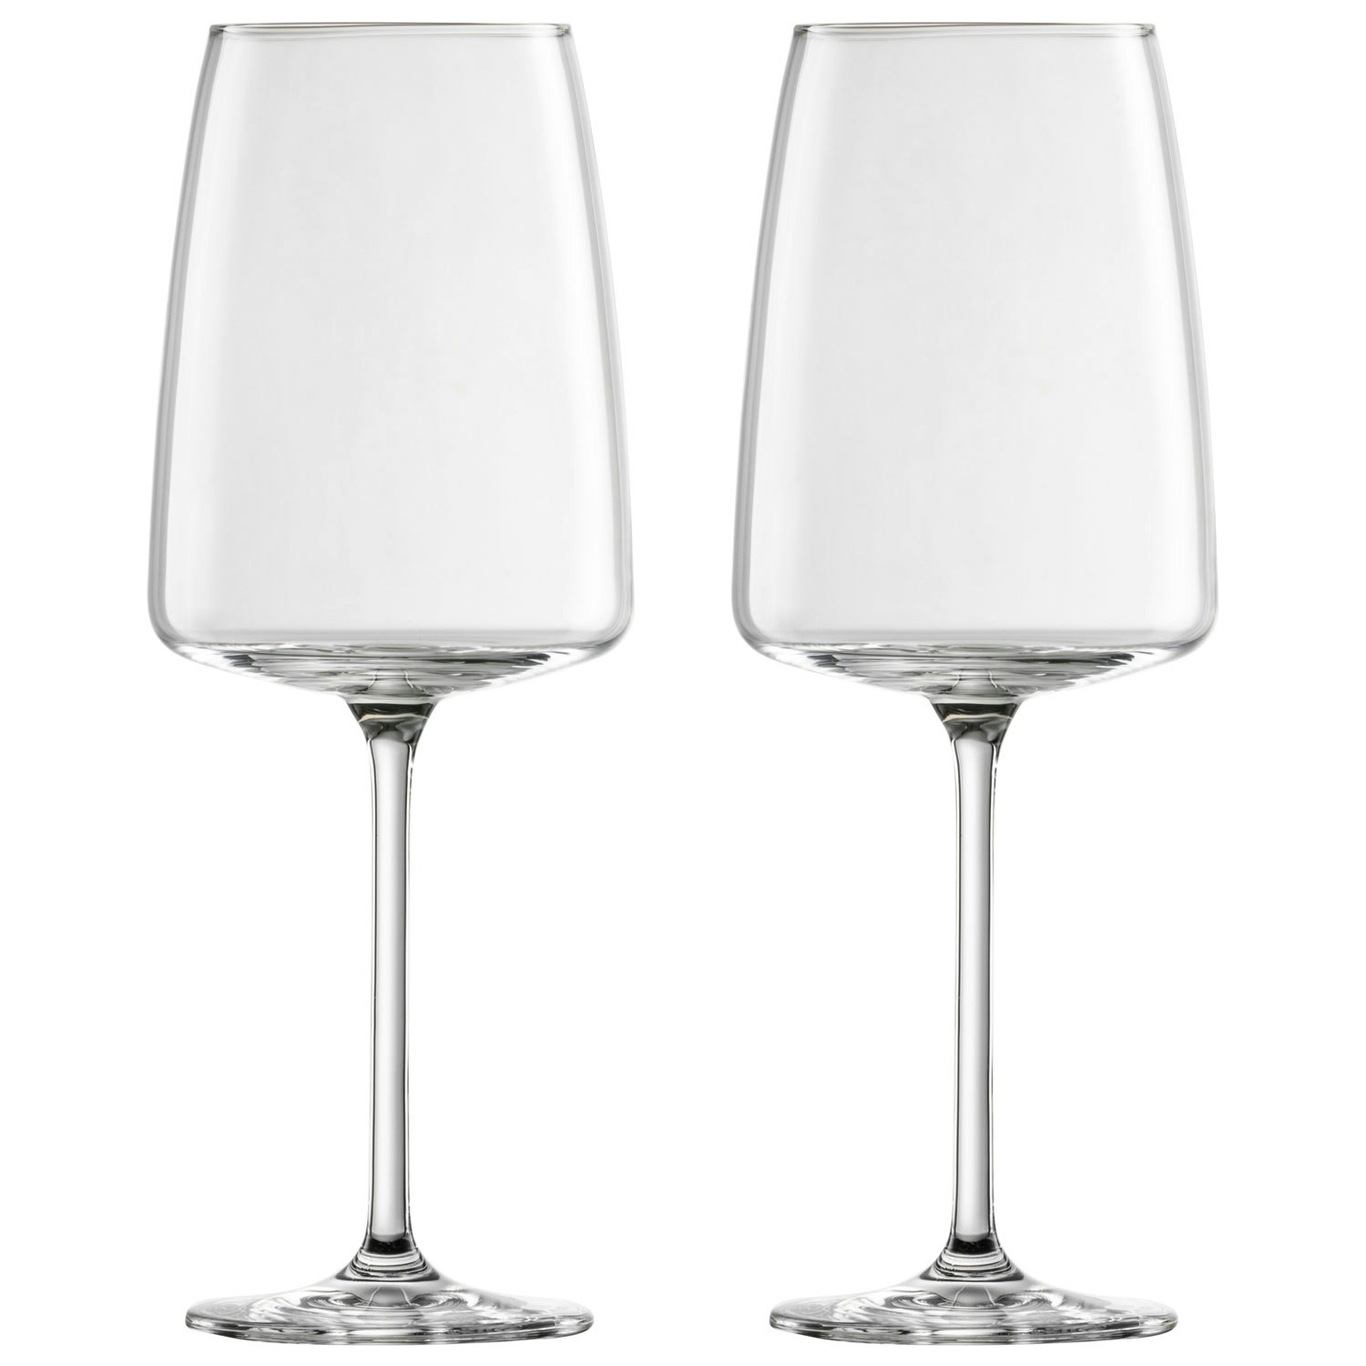 https://royaldesign.com/image/2/zwiesel-vivid-senses-fruity-delicate-wine-glass-53-cl-2-pack-0?w=800&quality=80